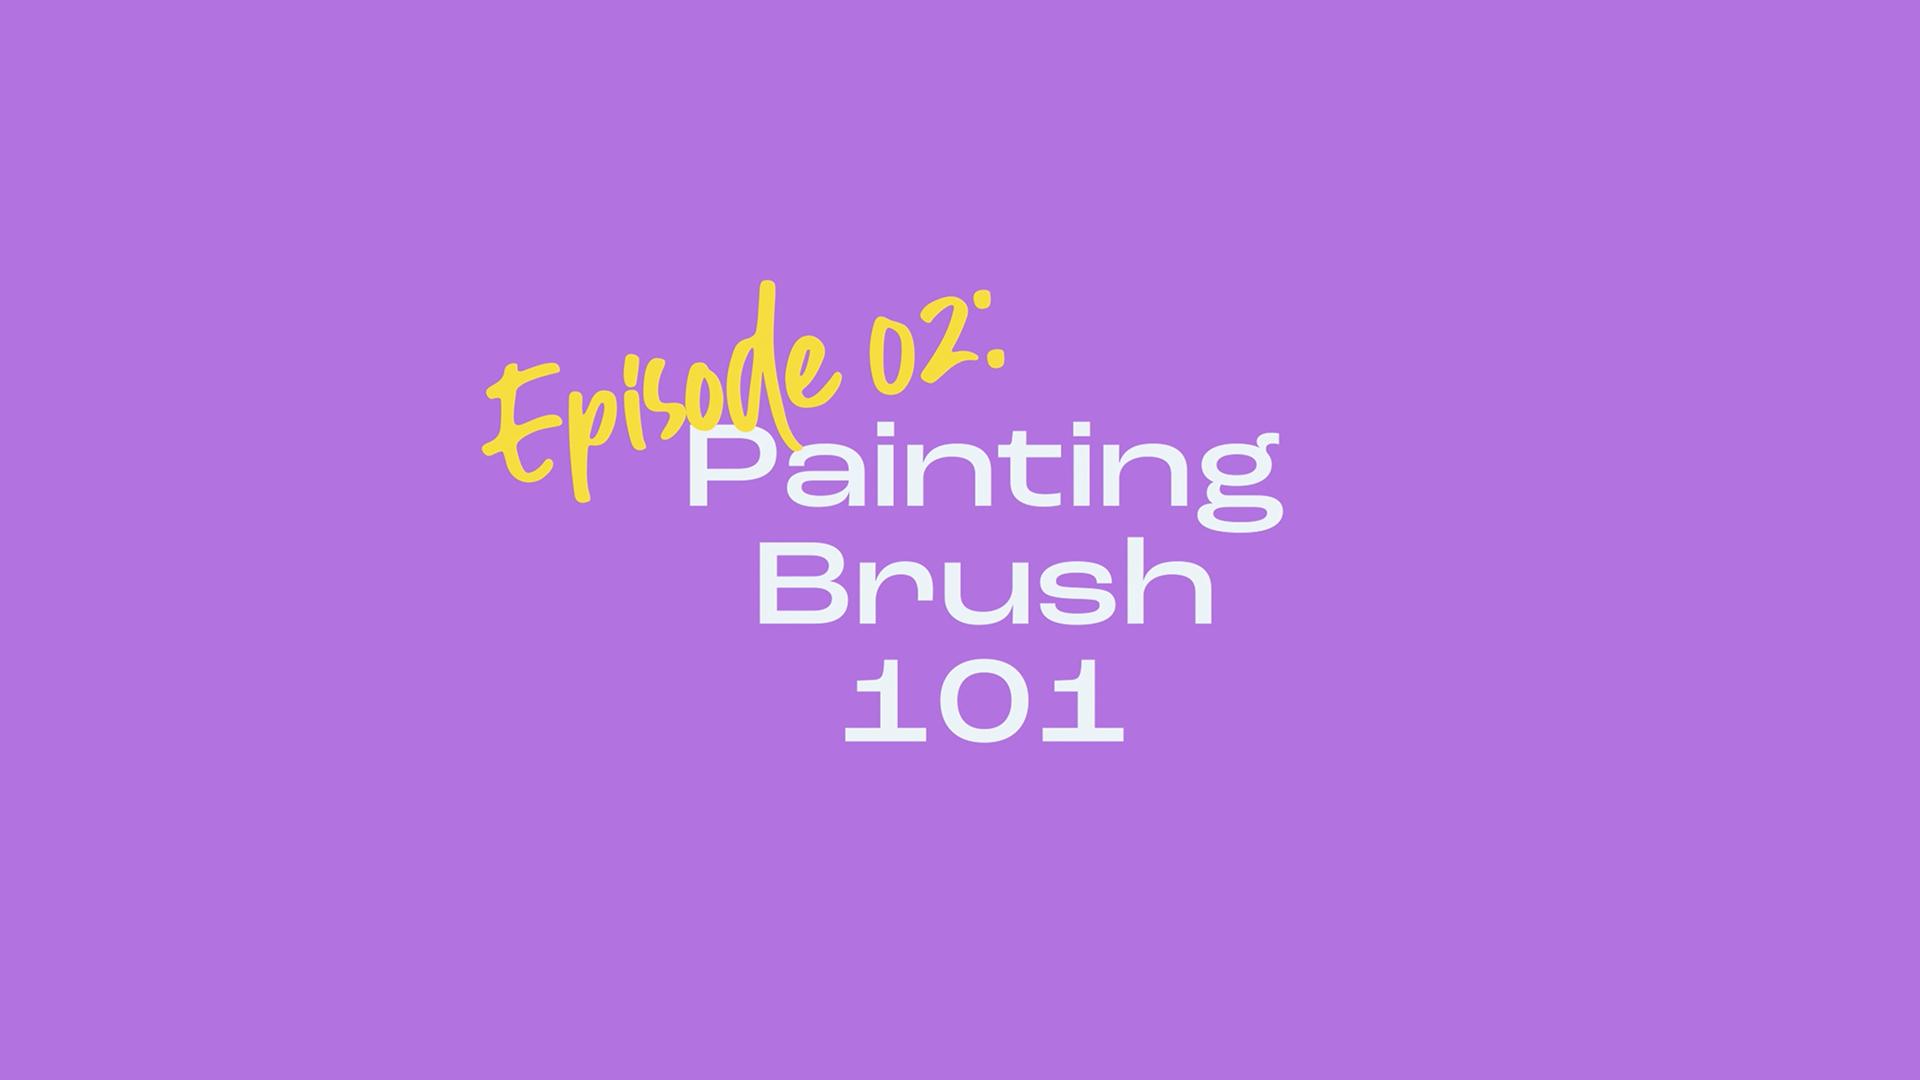 Painting It Easy
Painting Brush 101